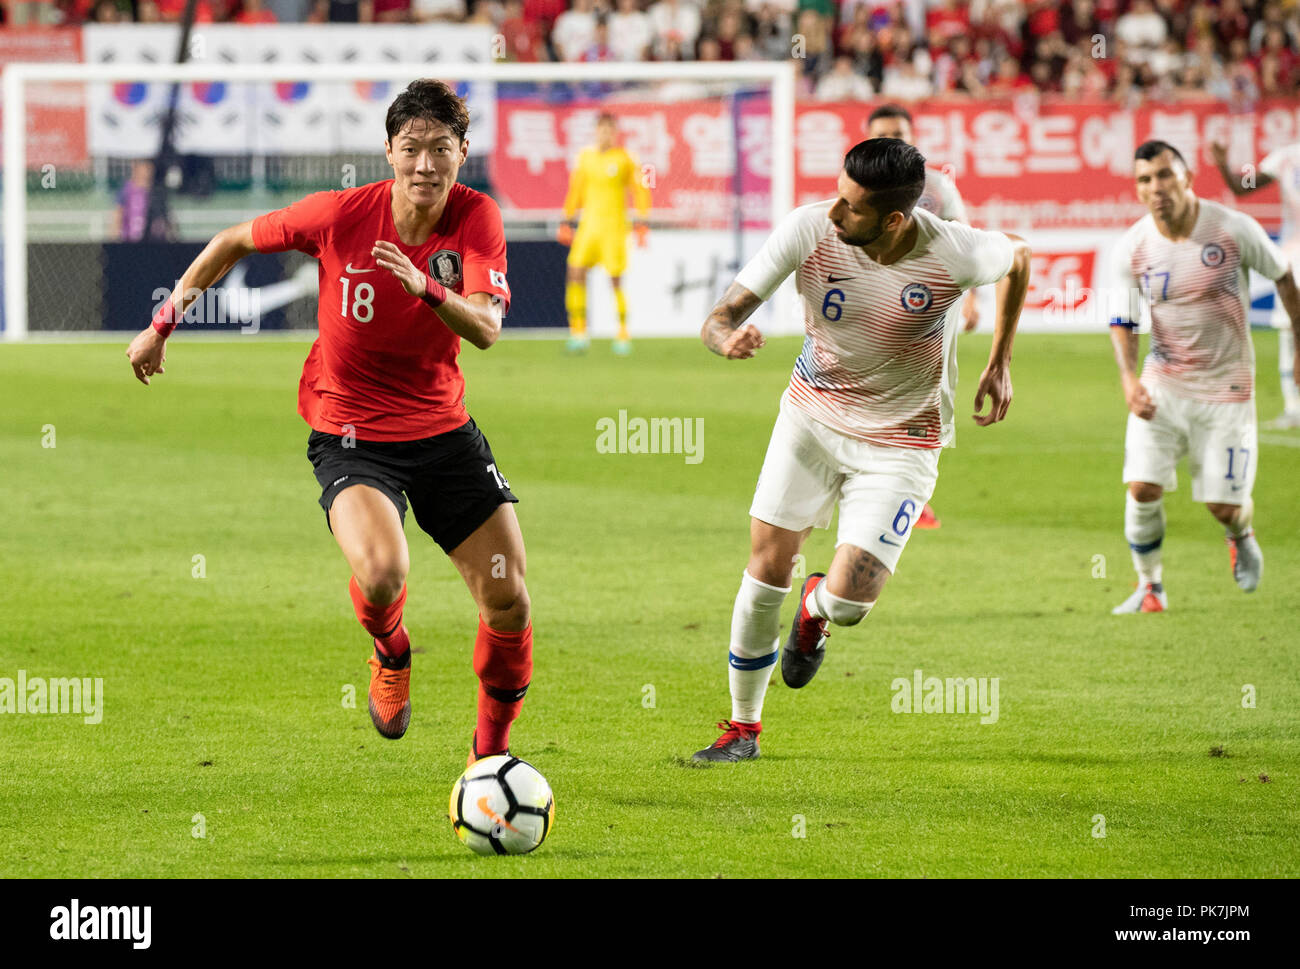 Suwon, South Korea. 11th Sep, 2018. Hwang Uijo (L) of South Korea vies with Guillermo Maripan of Chile during a friendly soccer match between South Korea and Chile at Suwon World Cup Stadium in Suwon, South Korea, on Sept. 11, 2018. The match ended with a 0-0 draw. Credit: Lee Sang-ho/Xinhua/Alamy Live News Stock Photo